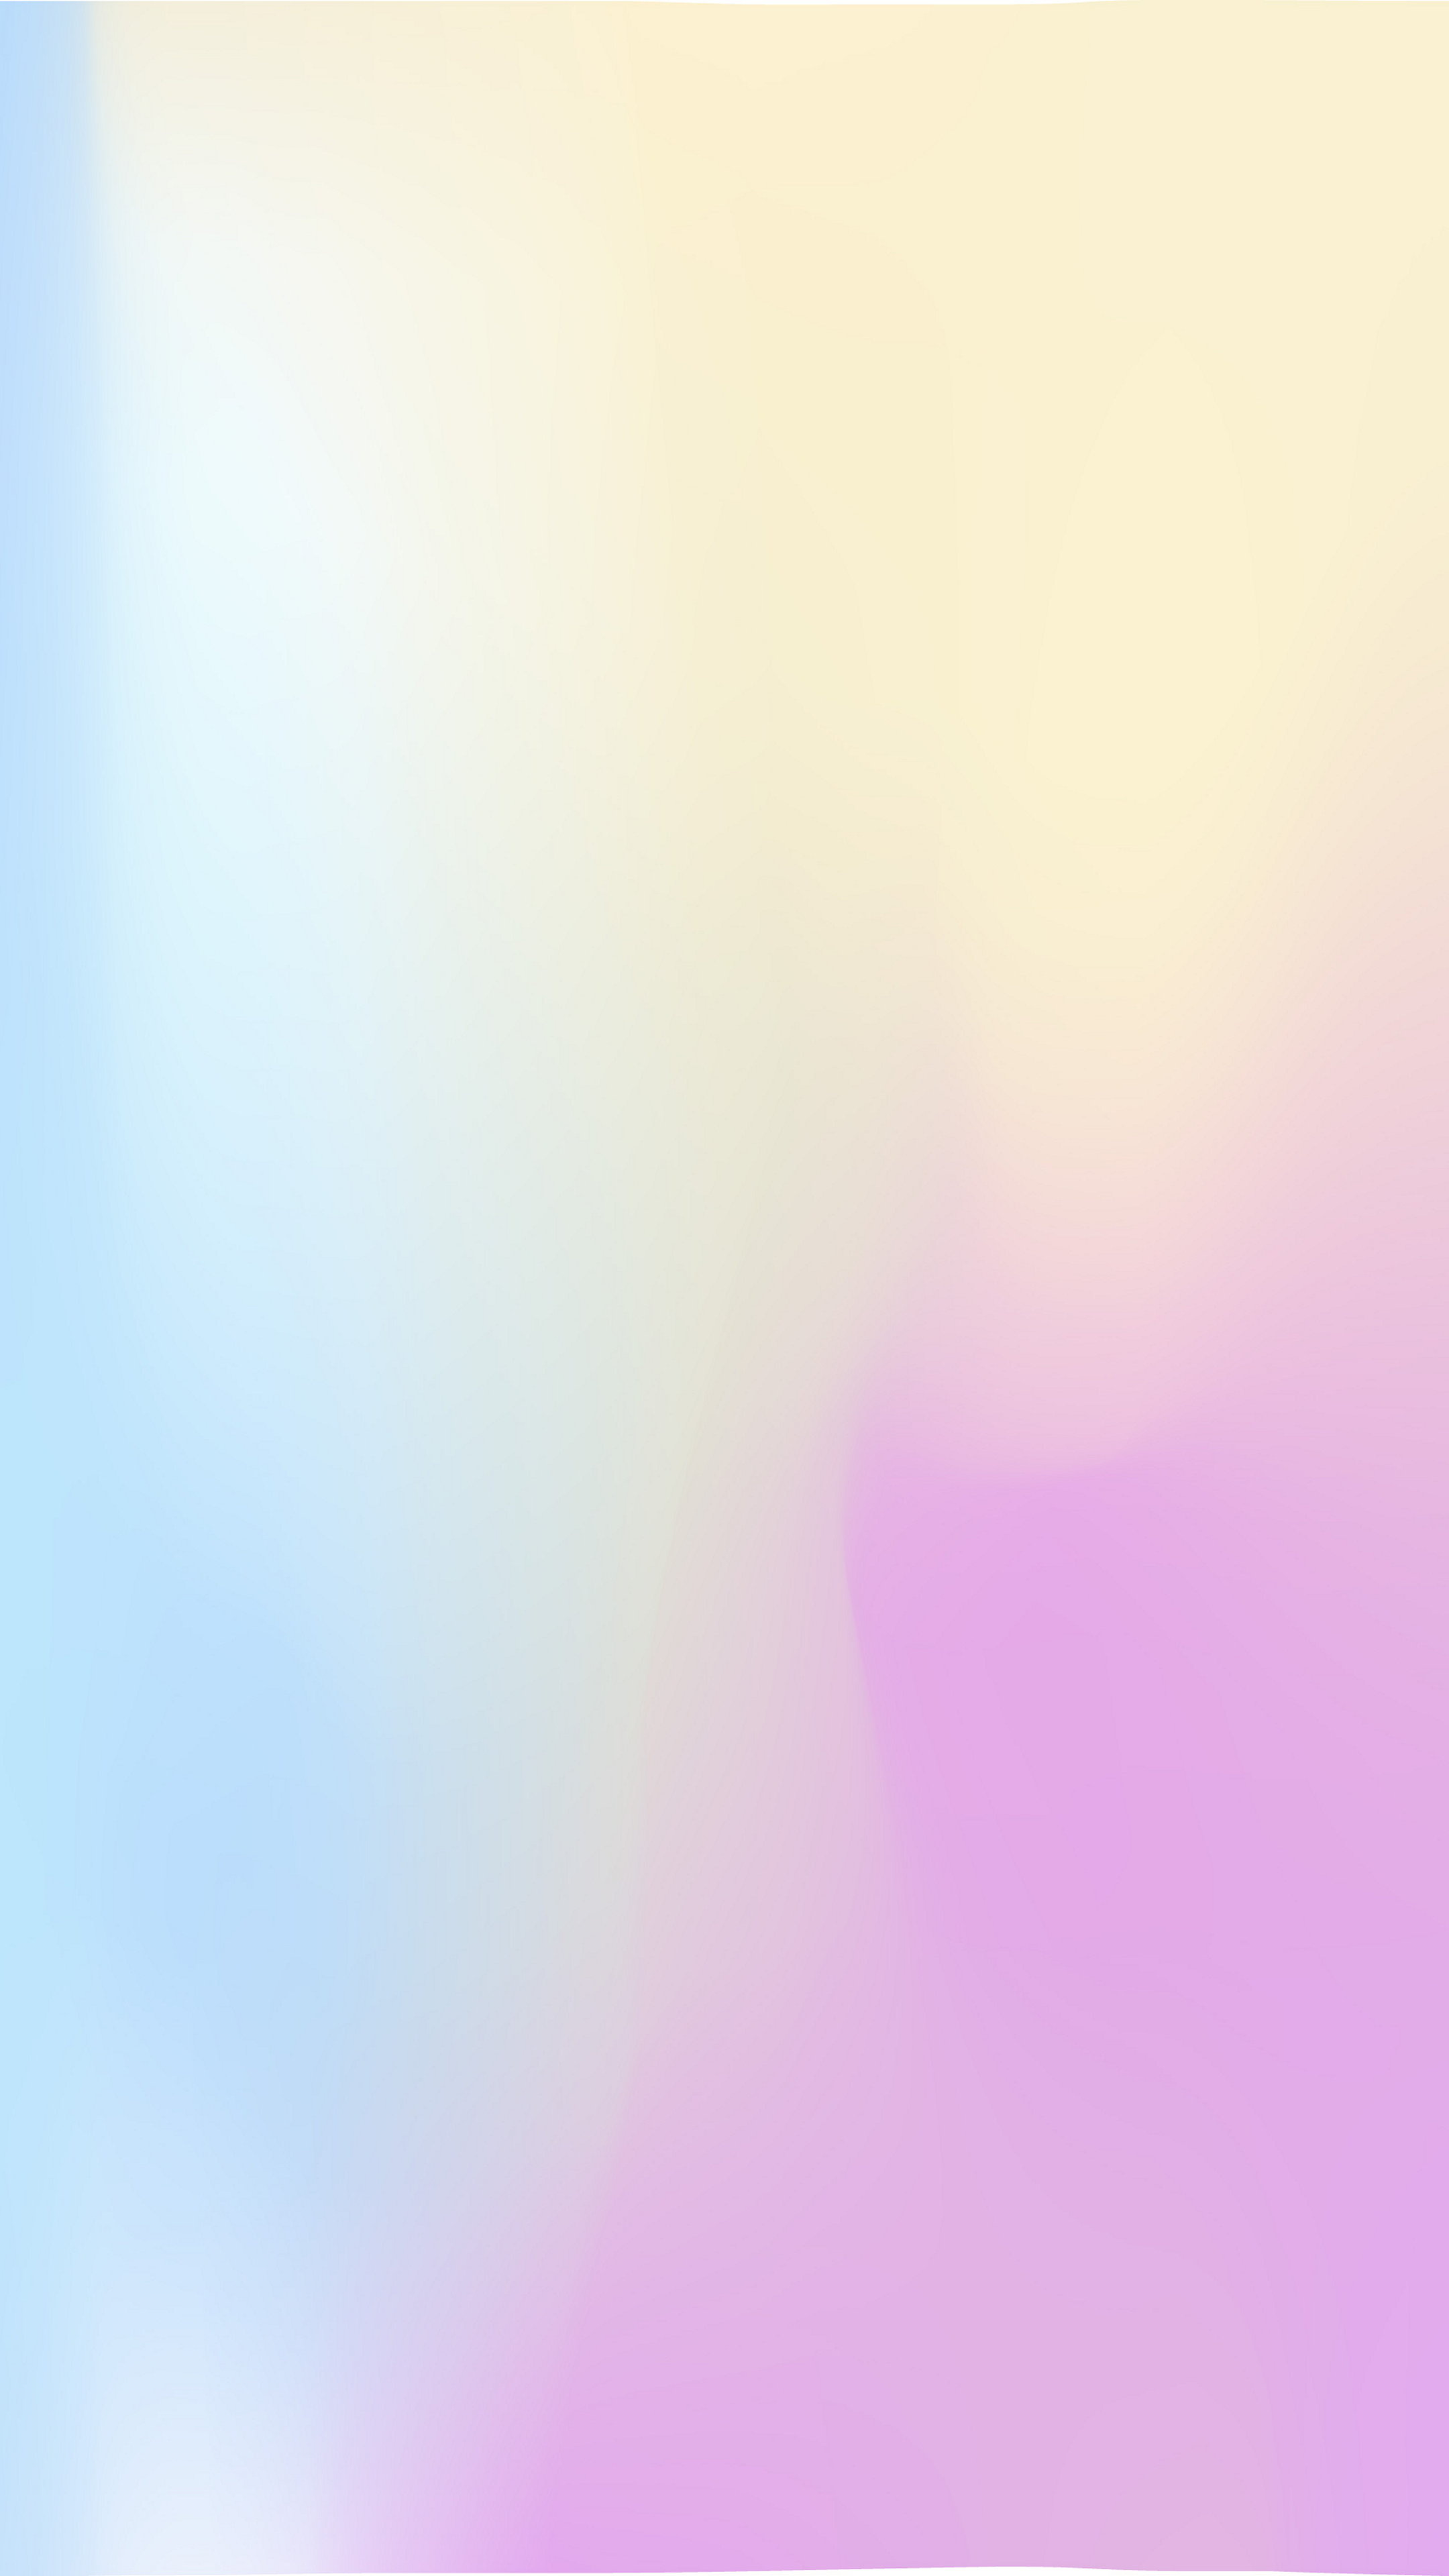 Pastel Colors, Pink gradient wallpapers, Captivating shades, Pretty and feminine, 2160x3840 4K Handy